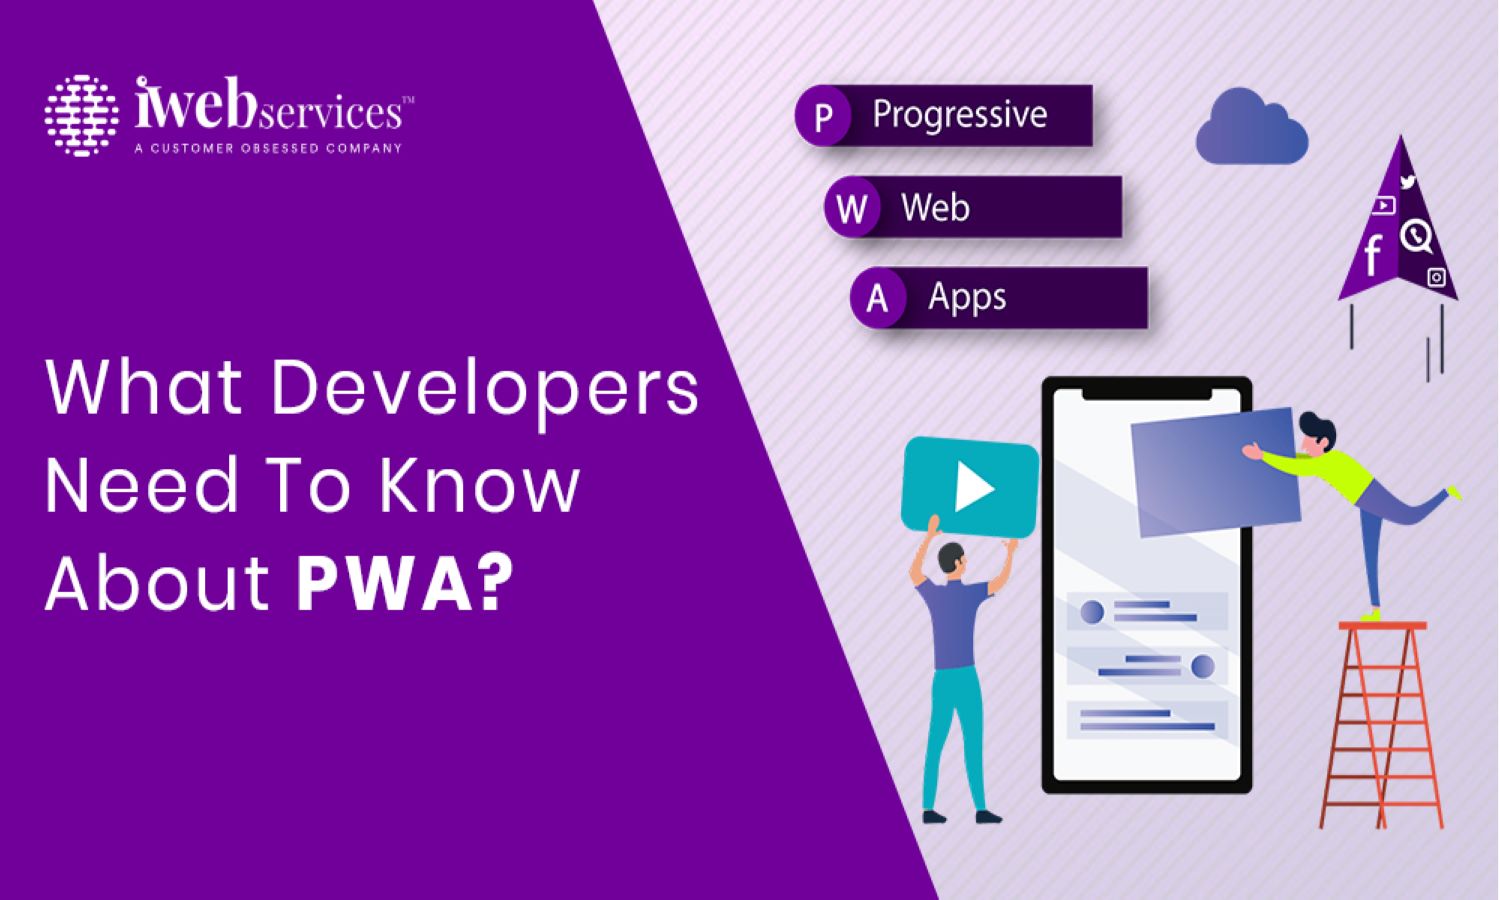 Developers Need To Know PWA